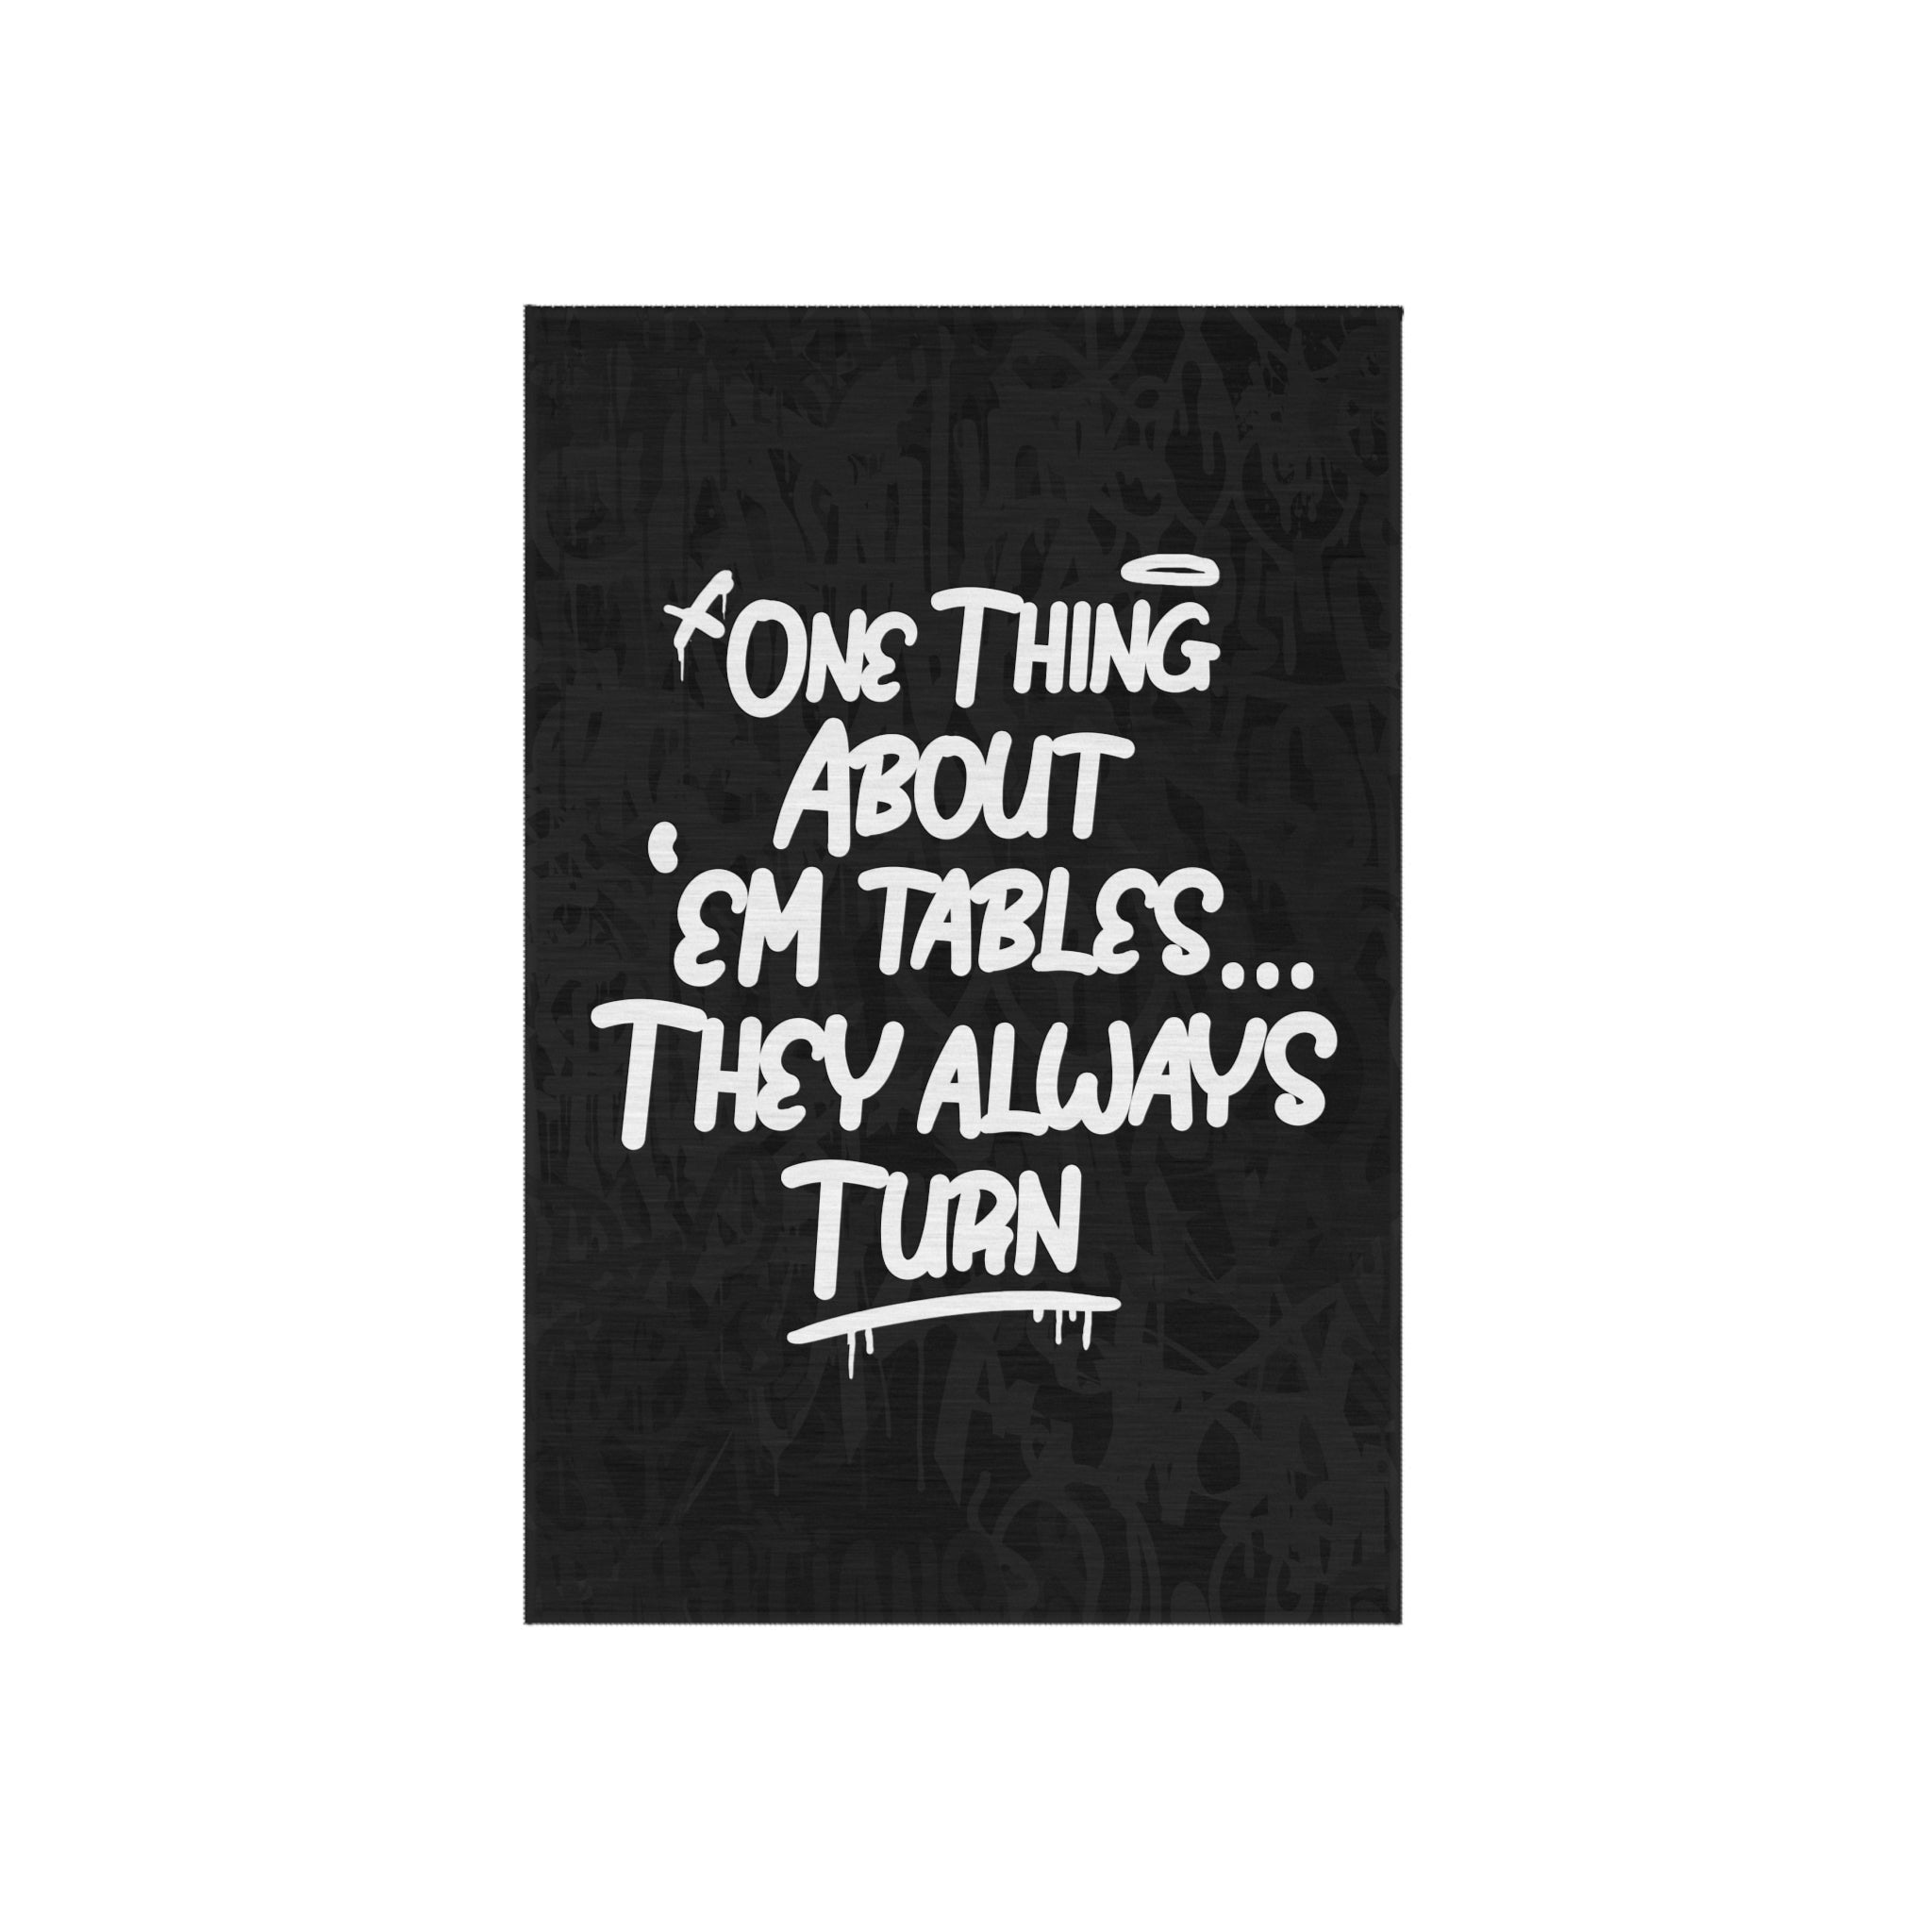 One Thing About Them Tables Rug - REBHORN DESIGN